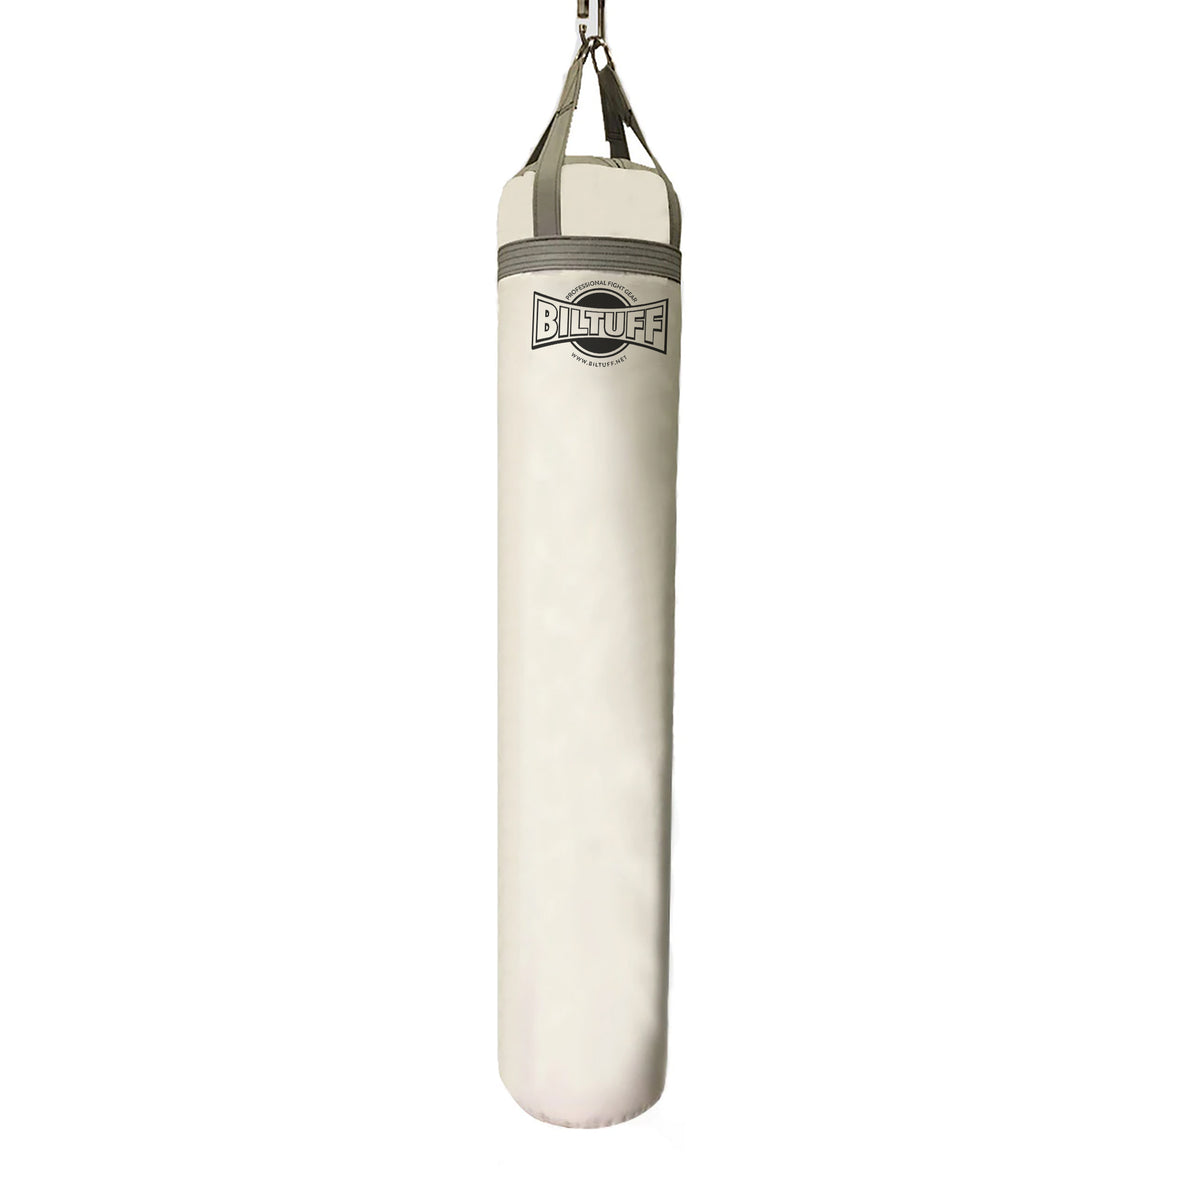 Buy Aurion White 4 Feet (48 Inches) Canvas Unfilled Heavy Punch Bag, Boxing  Bags for Sparring Punching and Training, Stainless Steel Hanging Chain, Muay Thai, Kickboxing, MMA